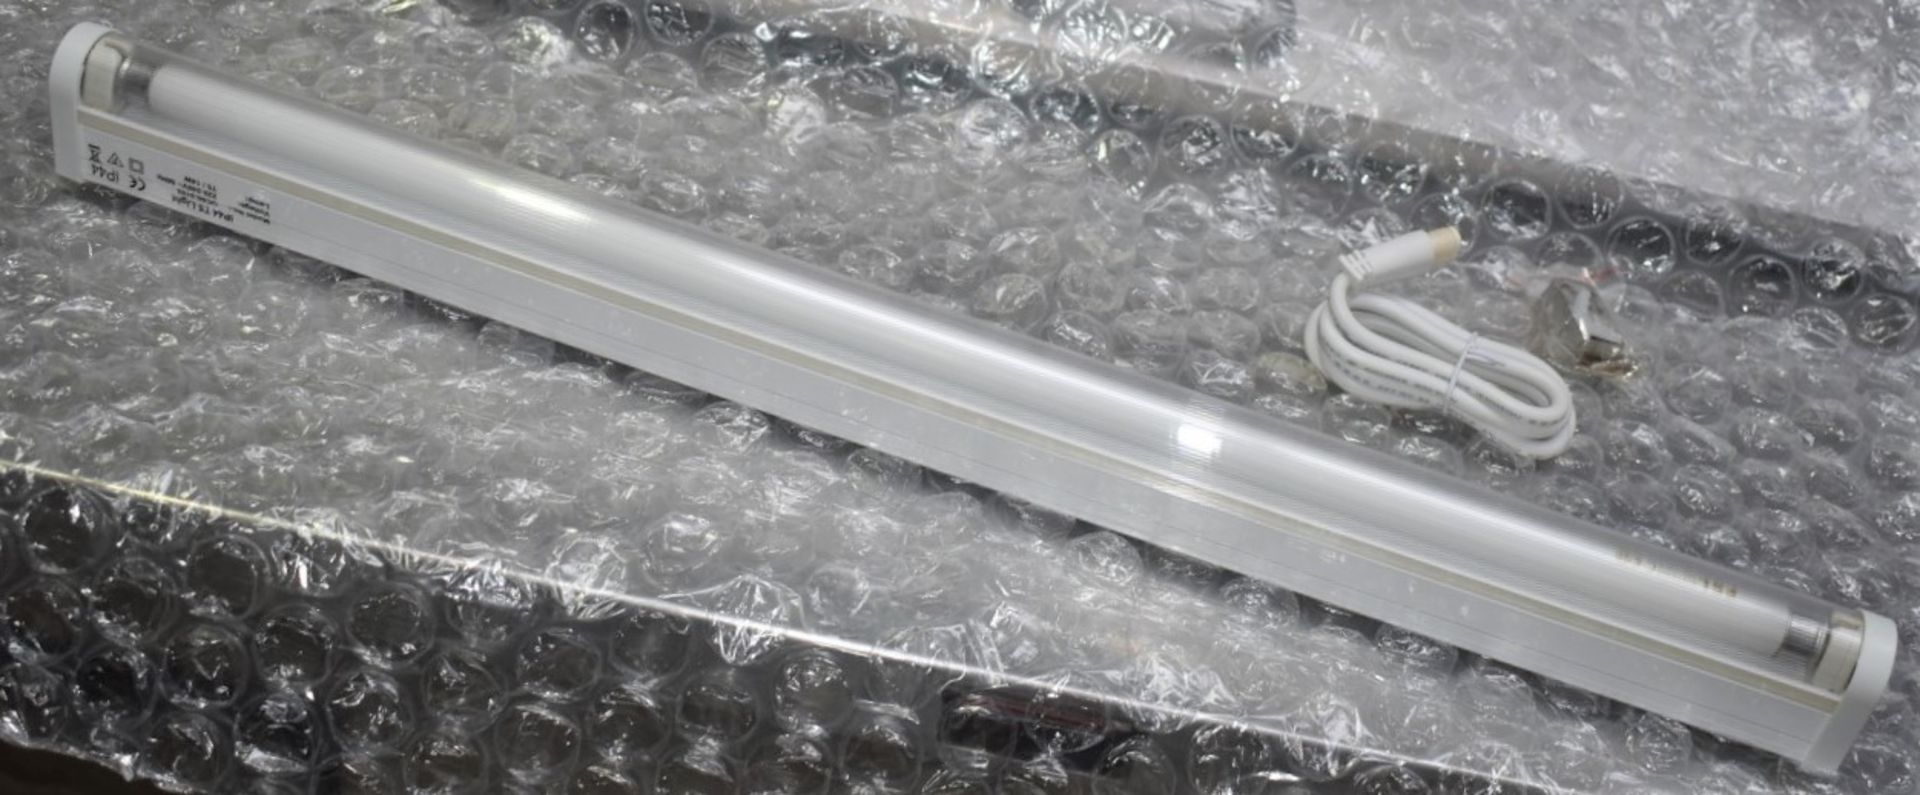 10 x Bathroom Light Fittings - IP44 Waterproof T5 14w Fluorescent Lights With Built-In Electronic - Image 2 of 11